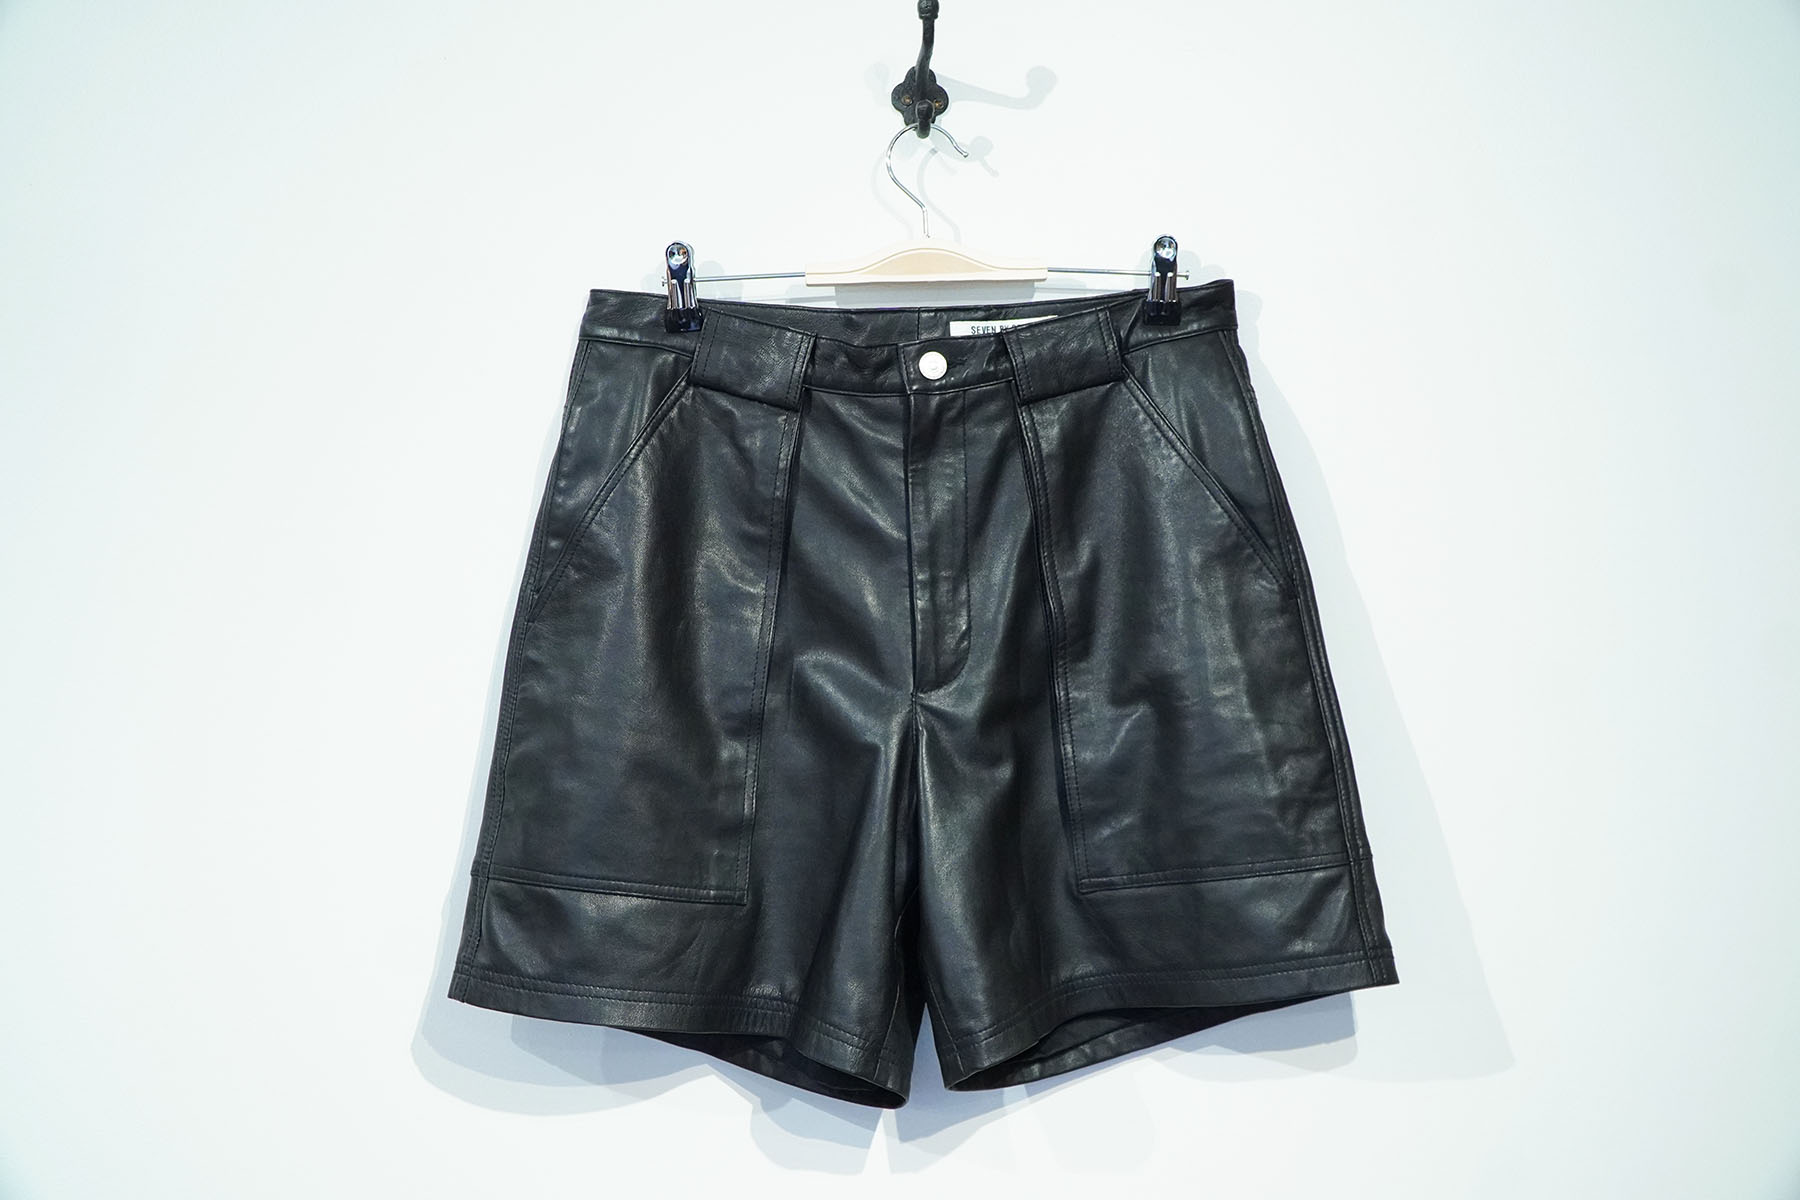 WPOCKET LEATHER SHORT PANTS seven by seven front